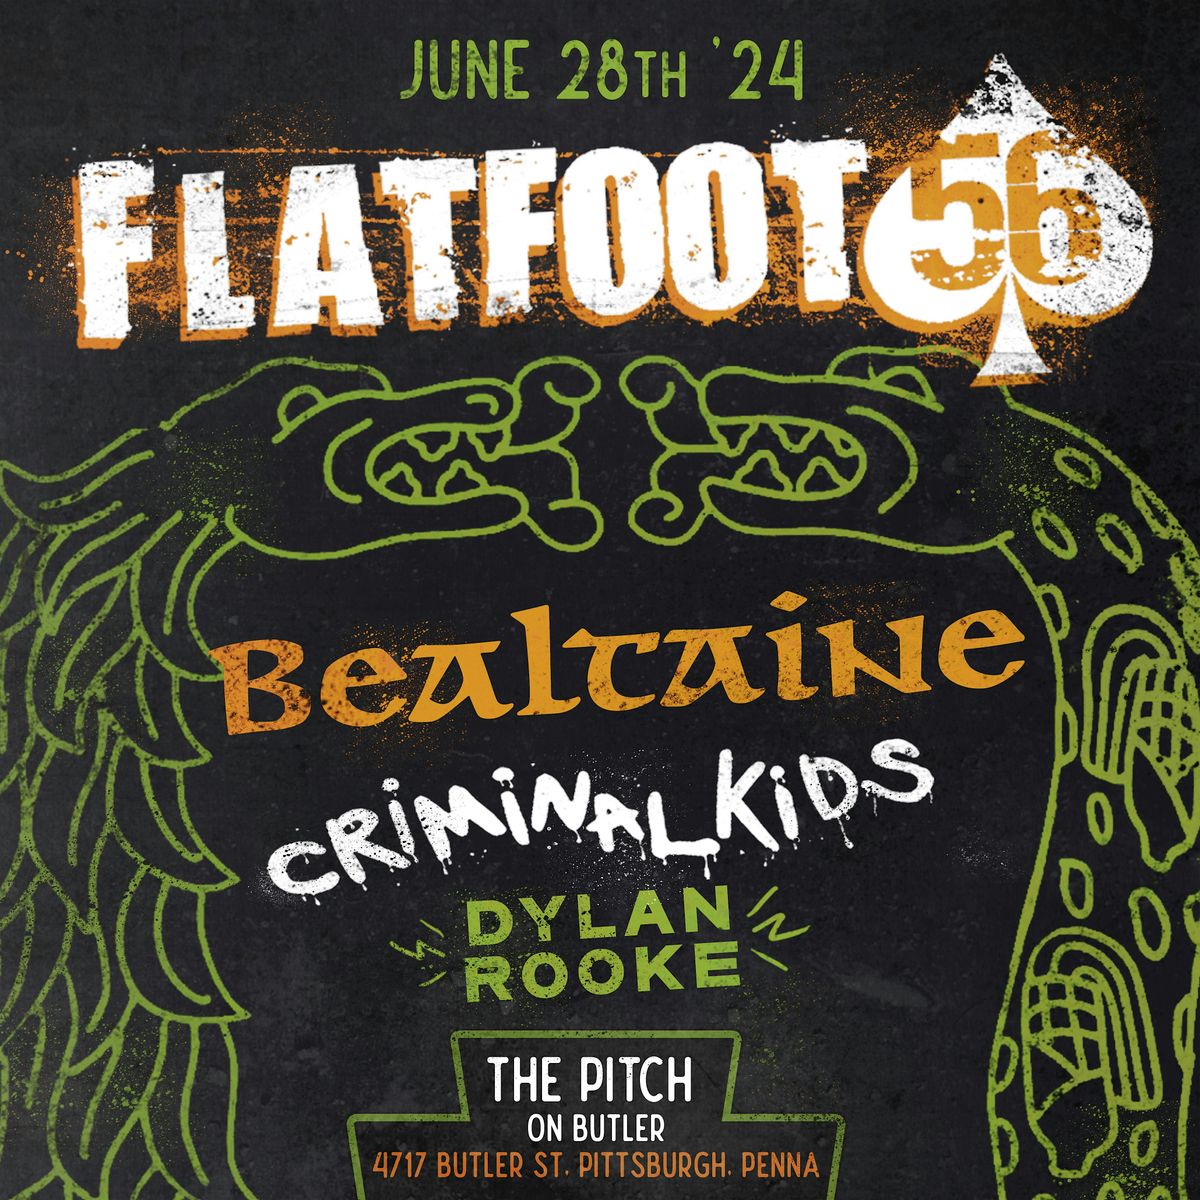 FLATFOOT 56 at the Pitch